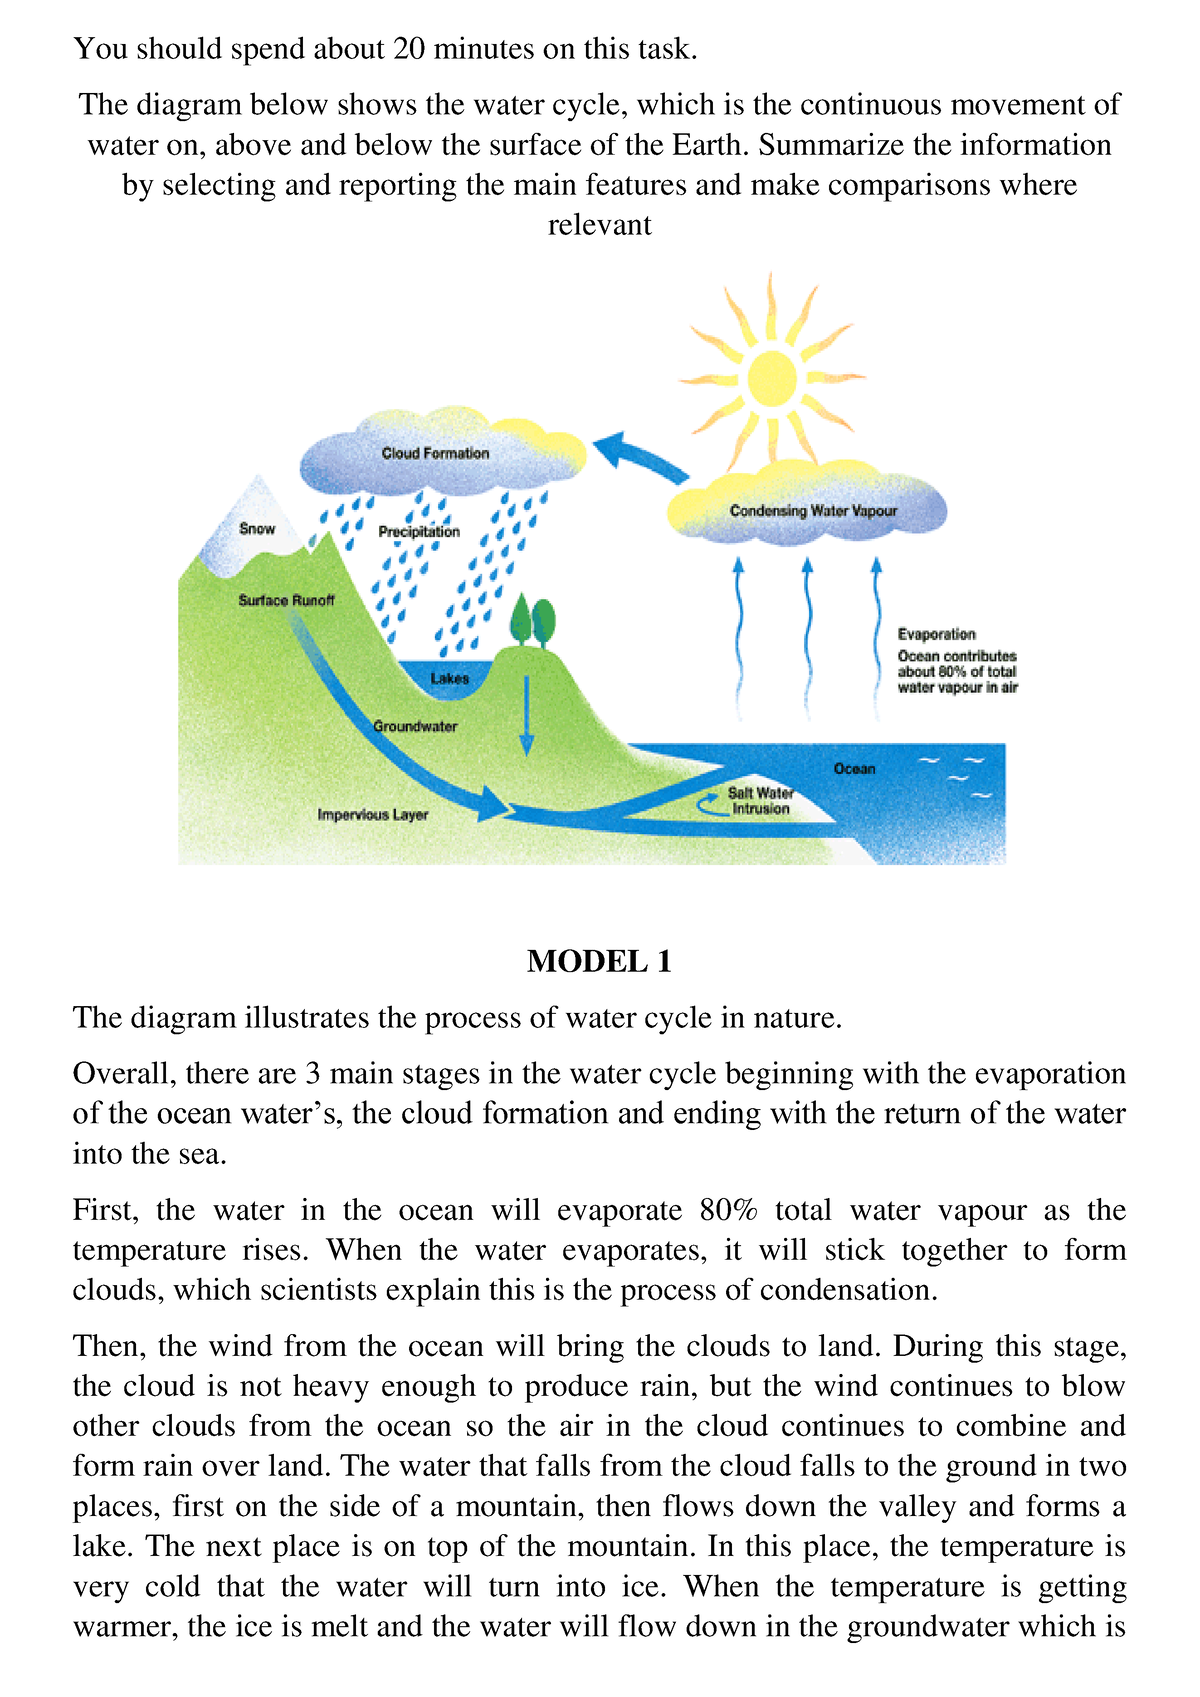 water is natural resources ielts essay